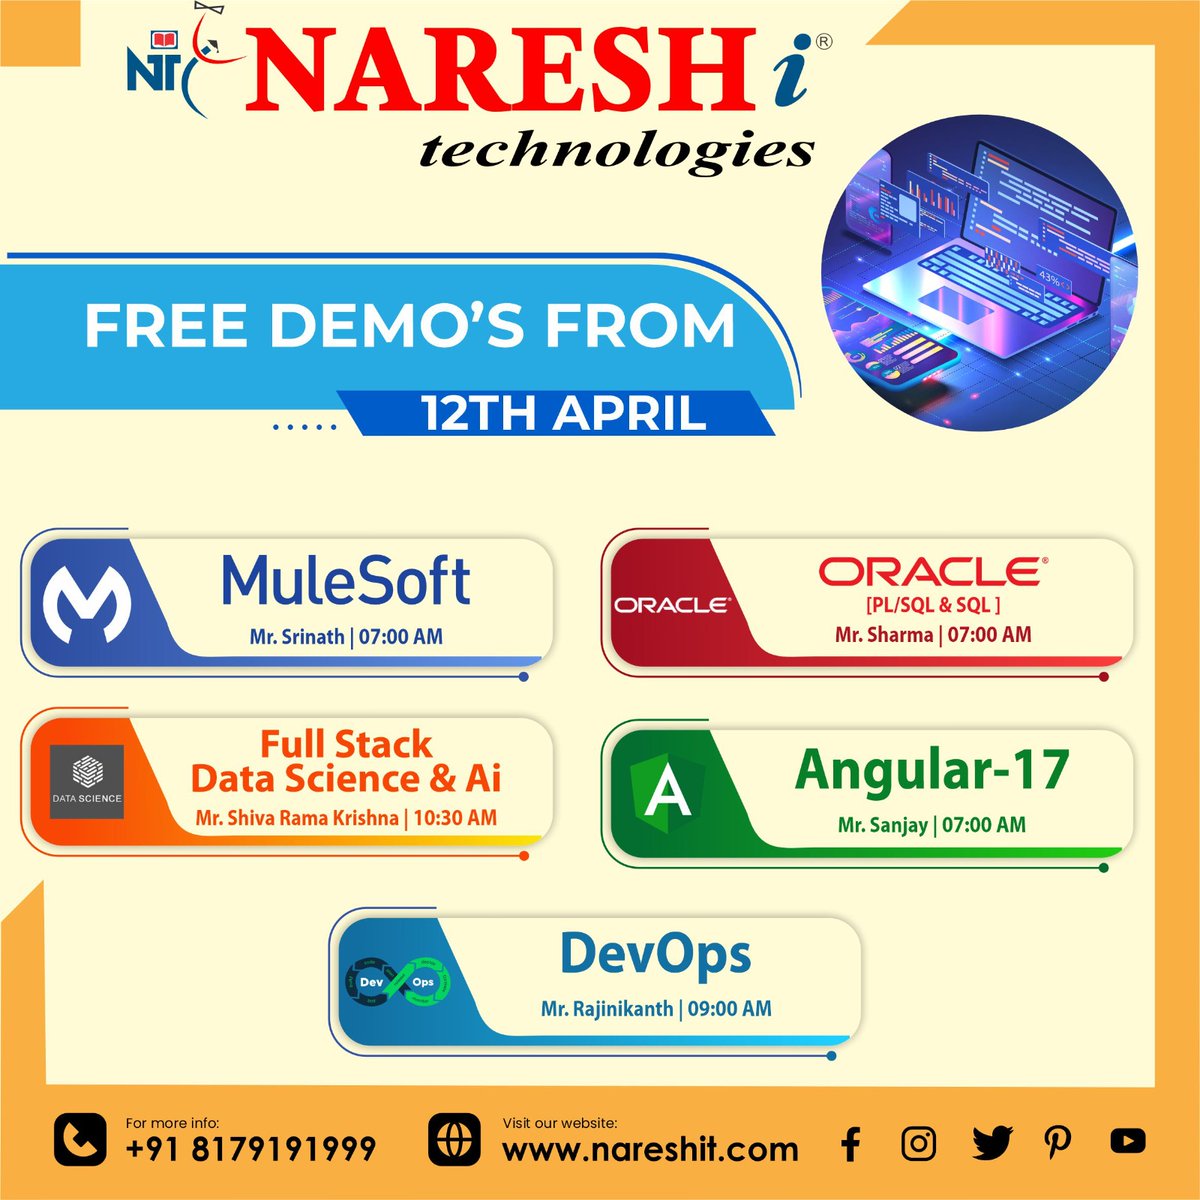 ✍️ Sign Up Now: linktr.ee/nareshitech and start your journey!
📅 Attend Free Demo on 12th April 24.
🚀 To Boost Your IT Career to the Next Level by Expert Faculty. Register now to reserve your spot.

#ITCourses #TechEducation #OnlineLearning #Programming #TechSkills #Coding